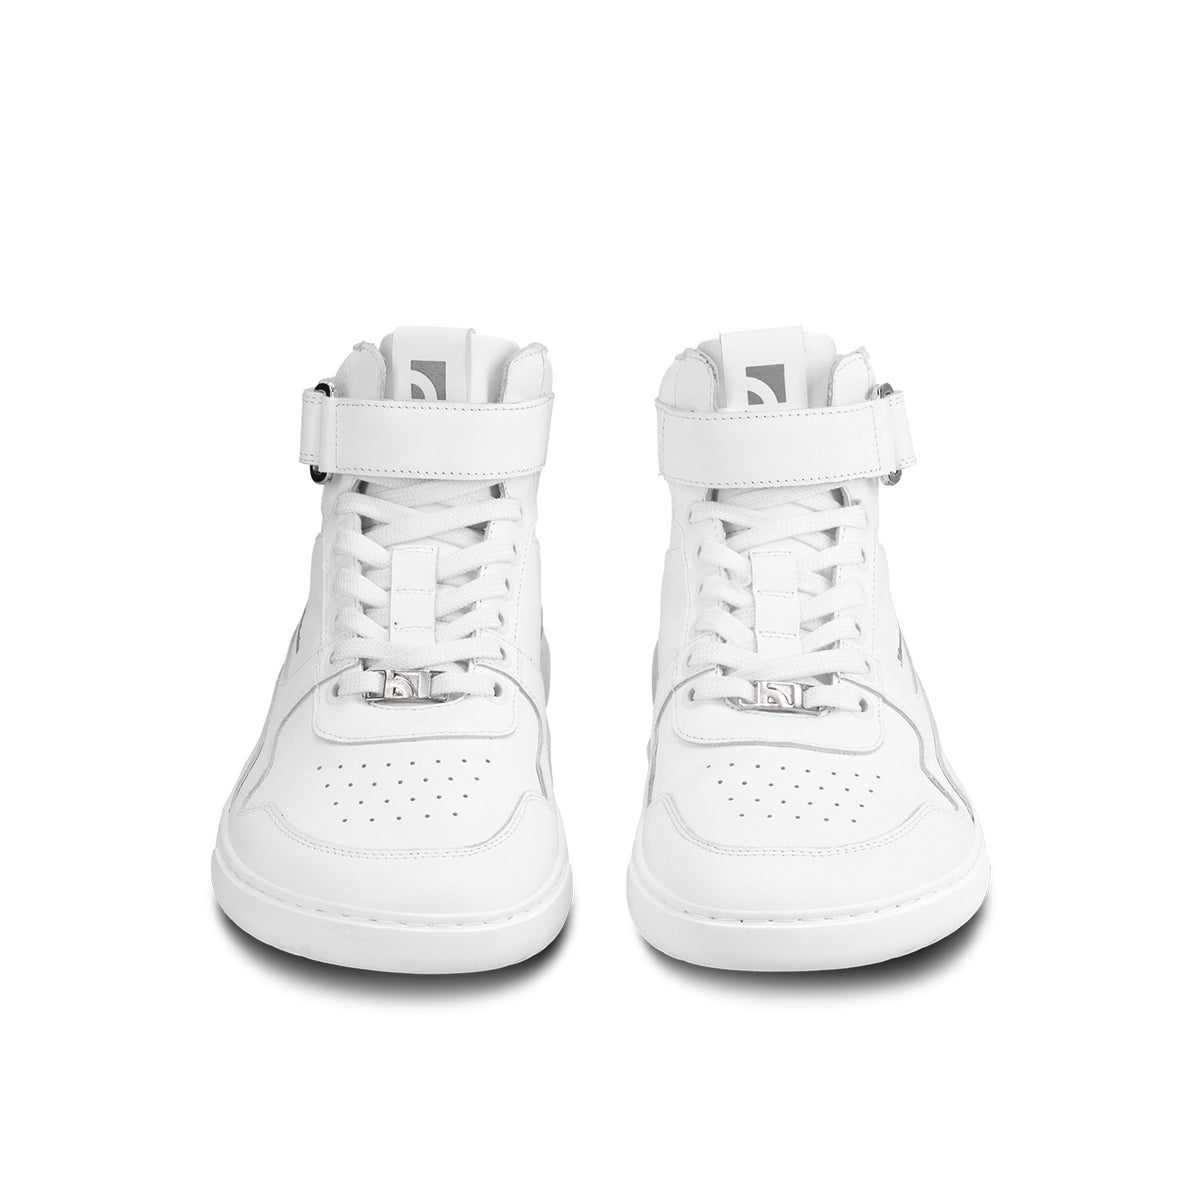 Barefoot Sneakers Barebarics Zing - High Top - All White - Leather 3  - OzBarefoot